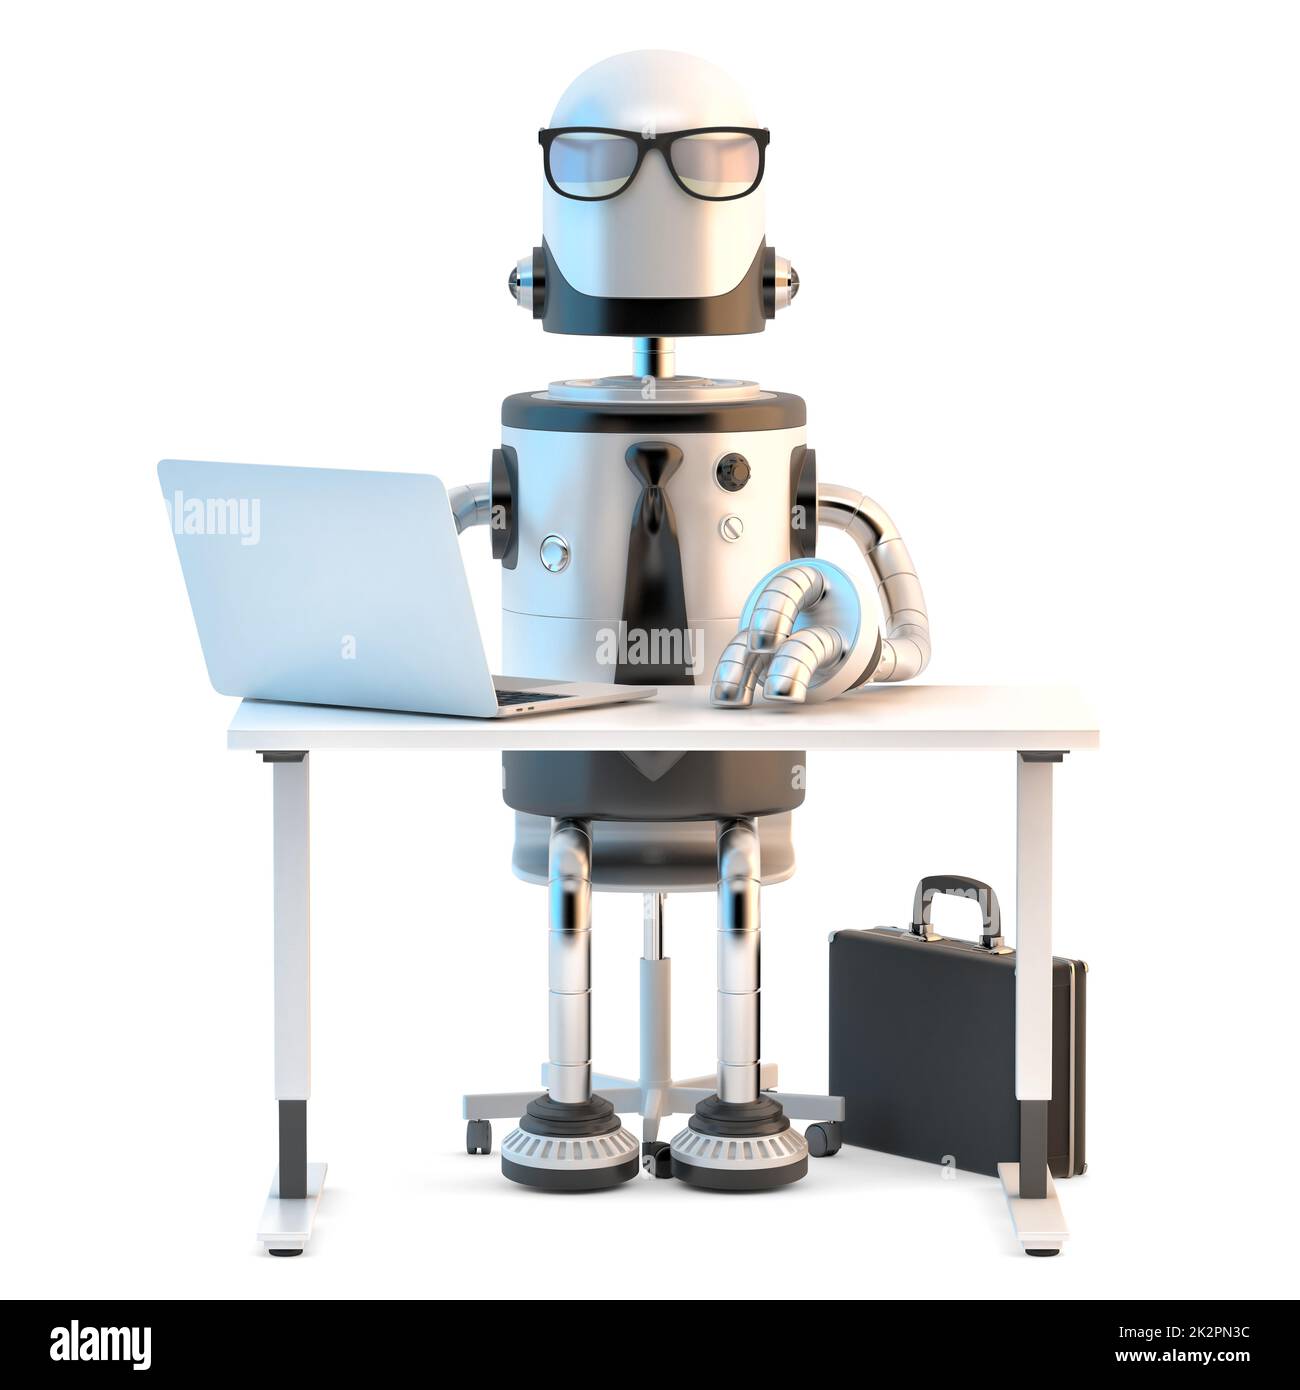 Robot at work. 3D illustration. Isolated on white background Stock Photo